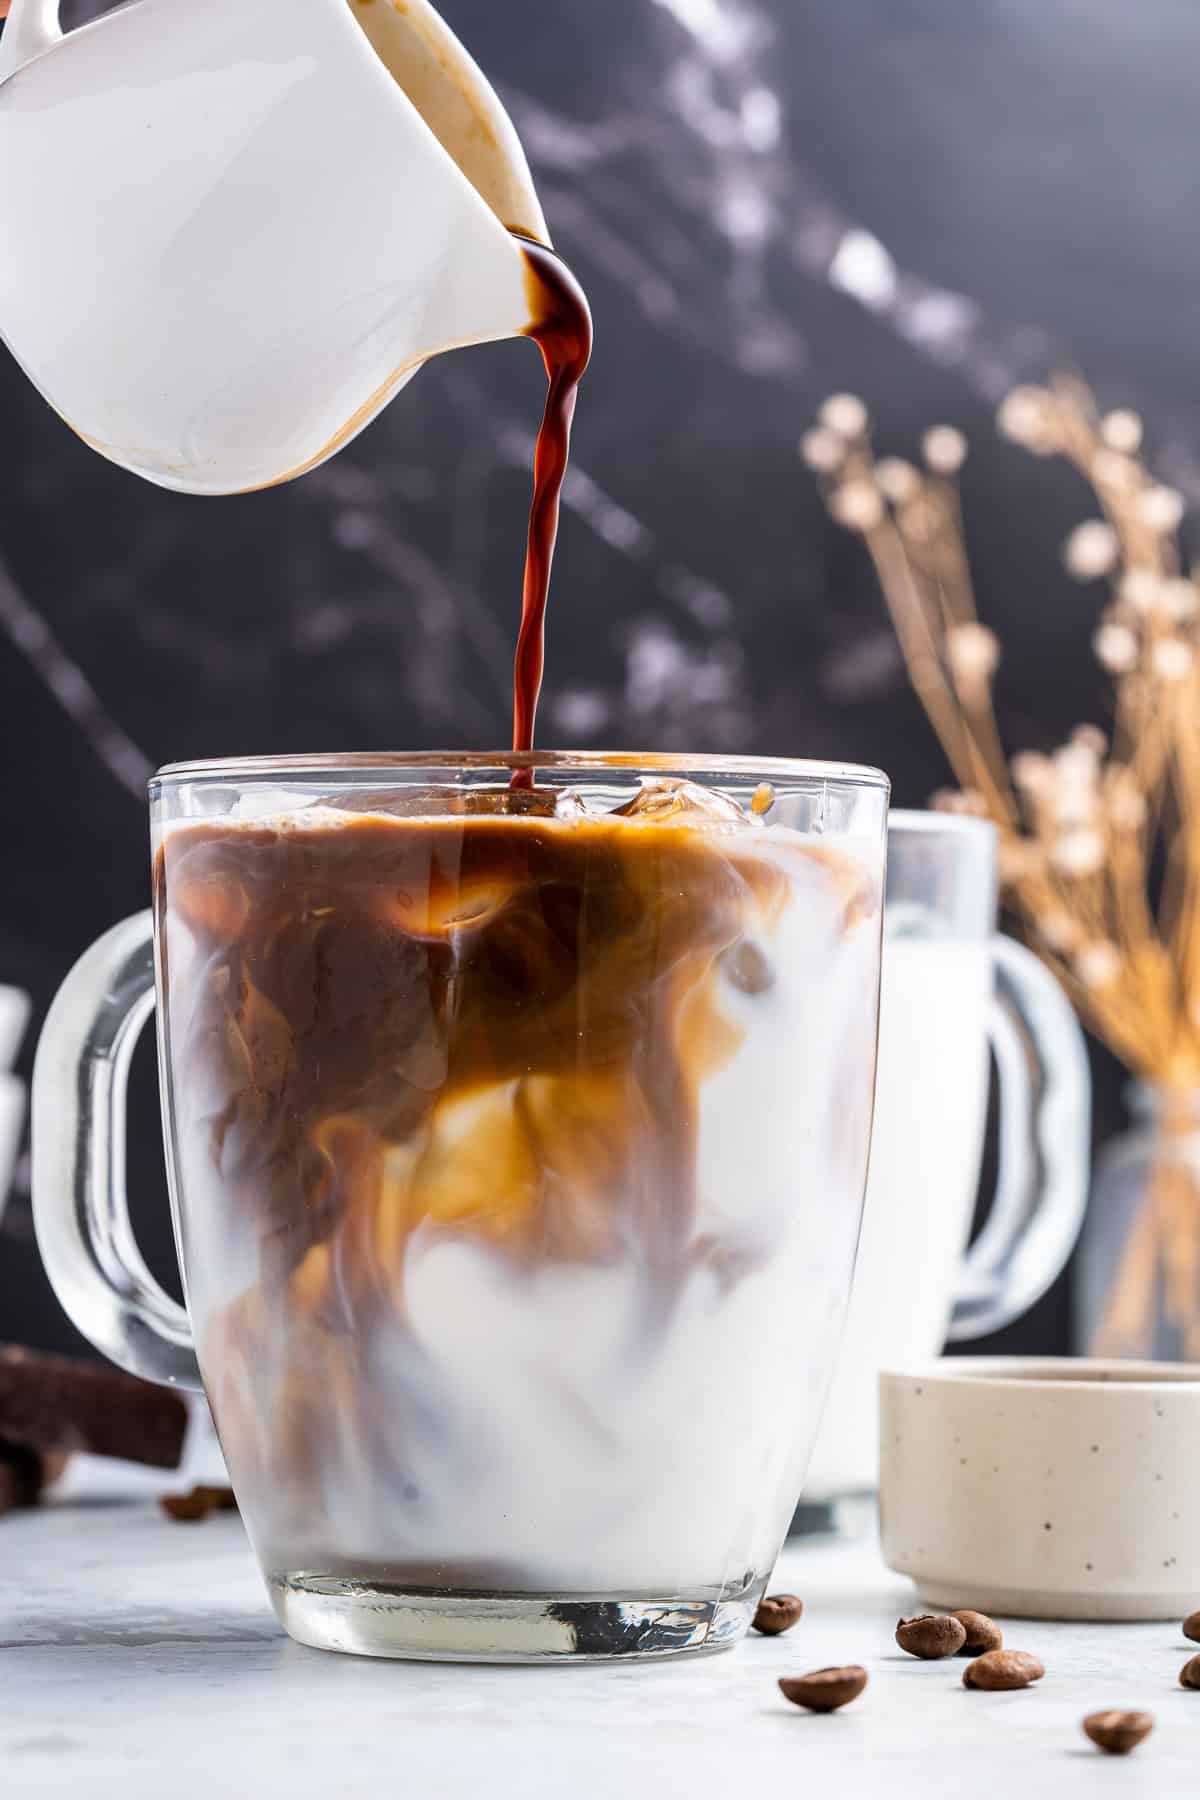 Coffee being poured into a glass of ice and milk.